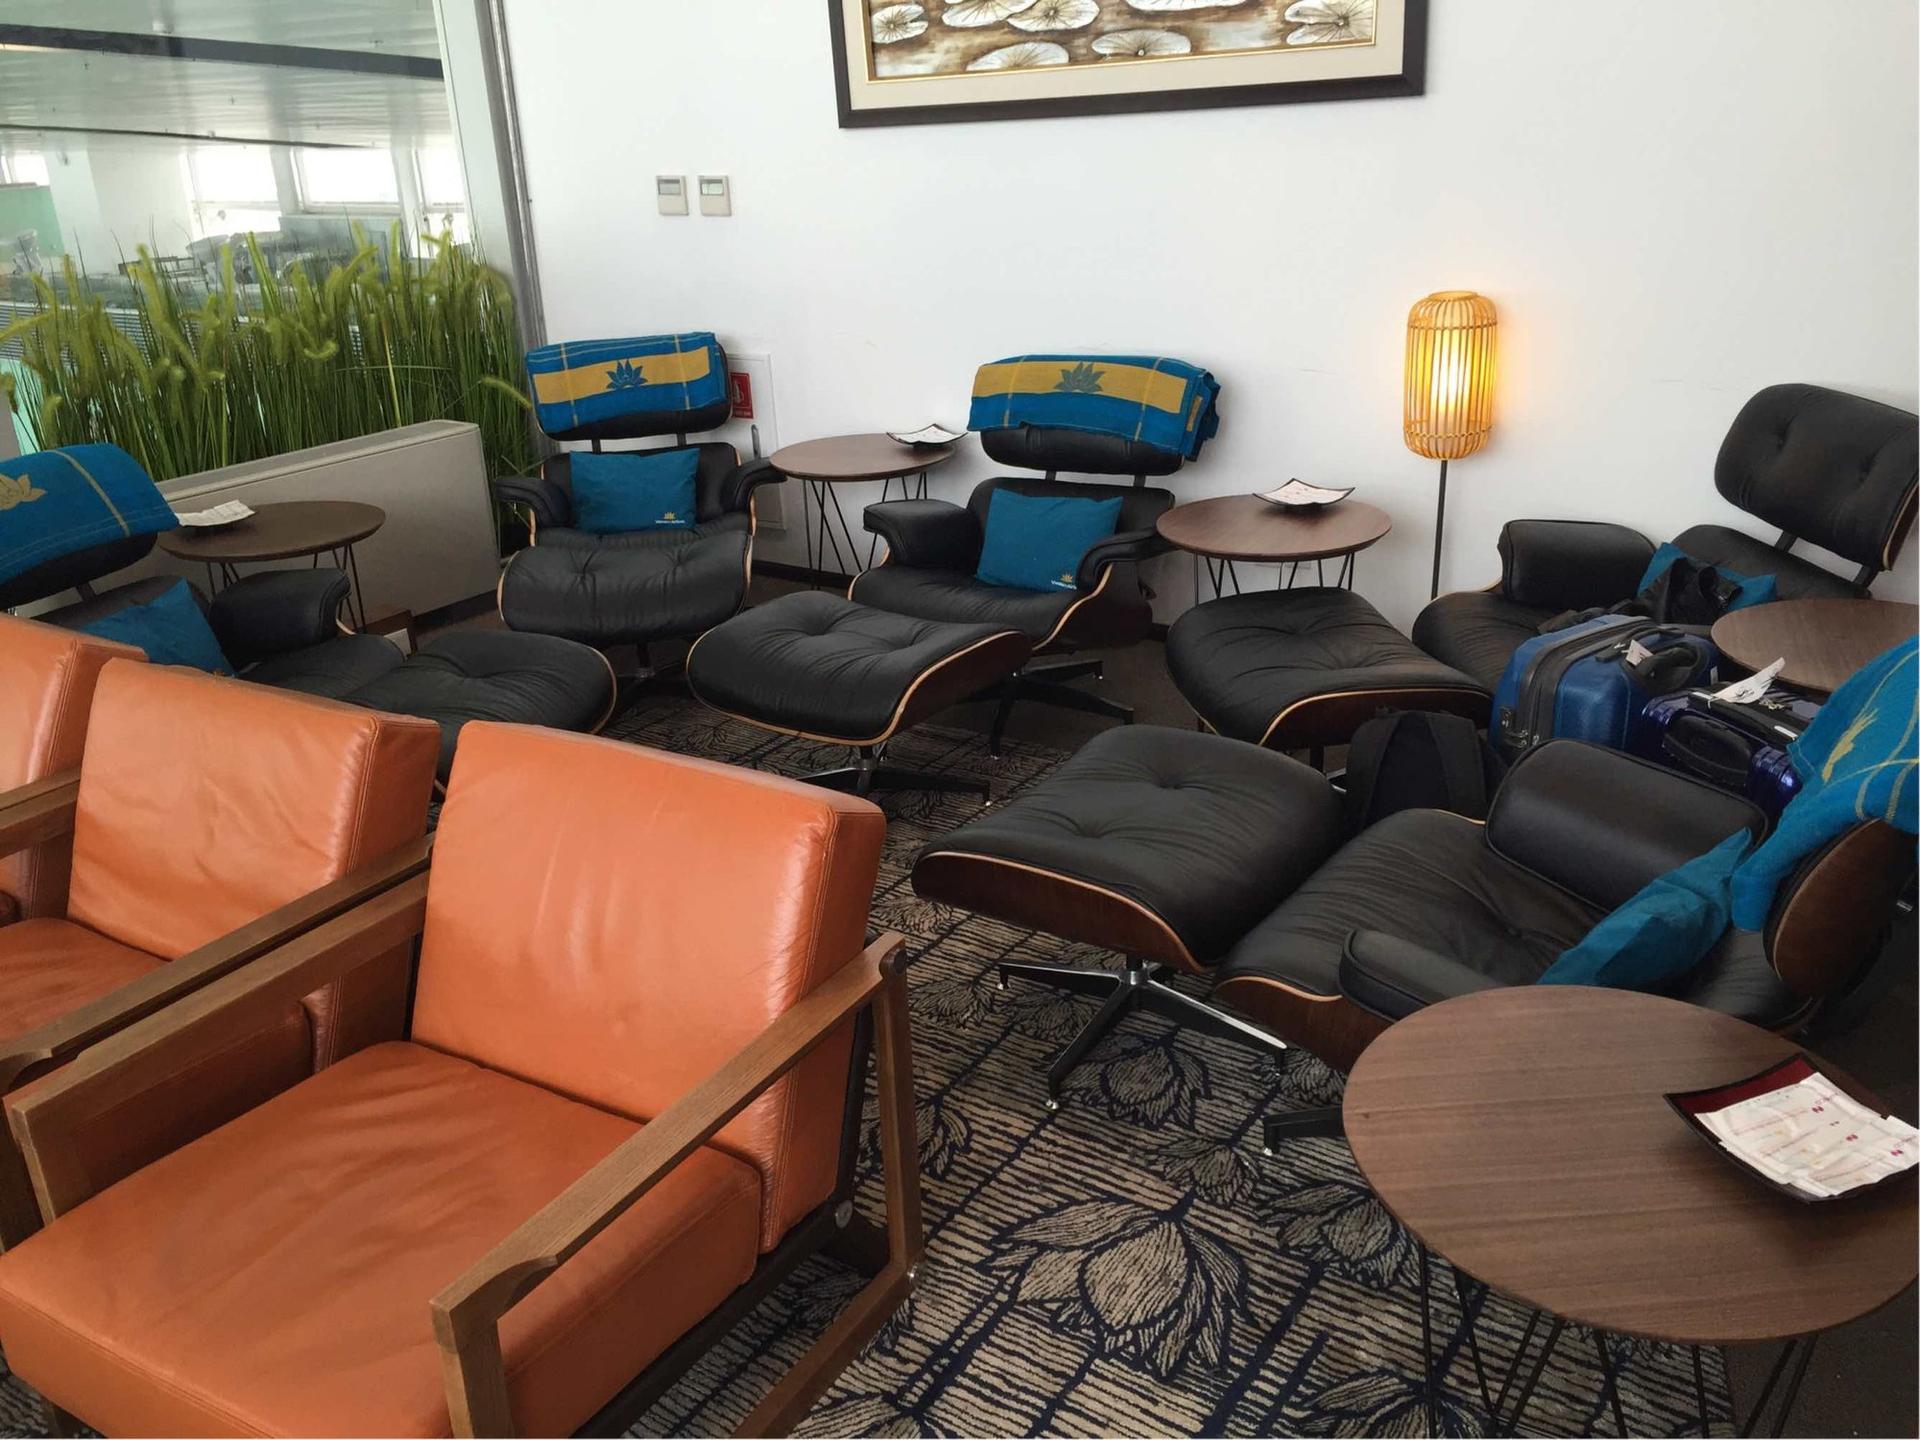 Vietnam Airlines Business Class Lounge image 10 of 16